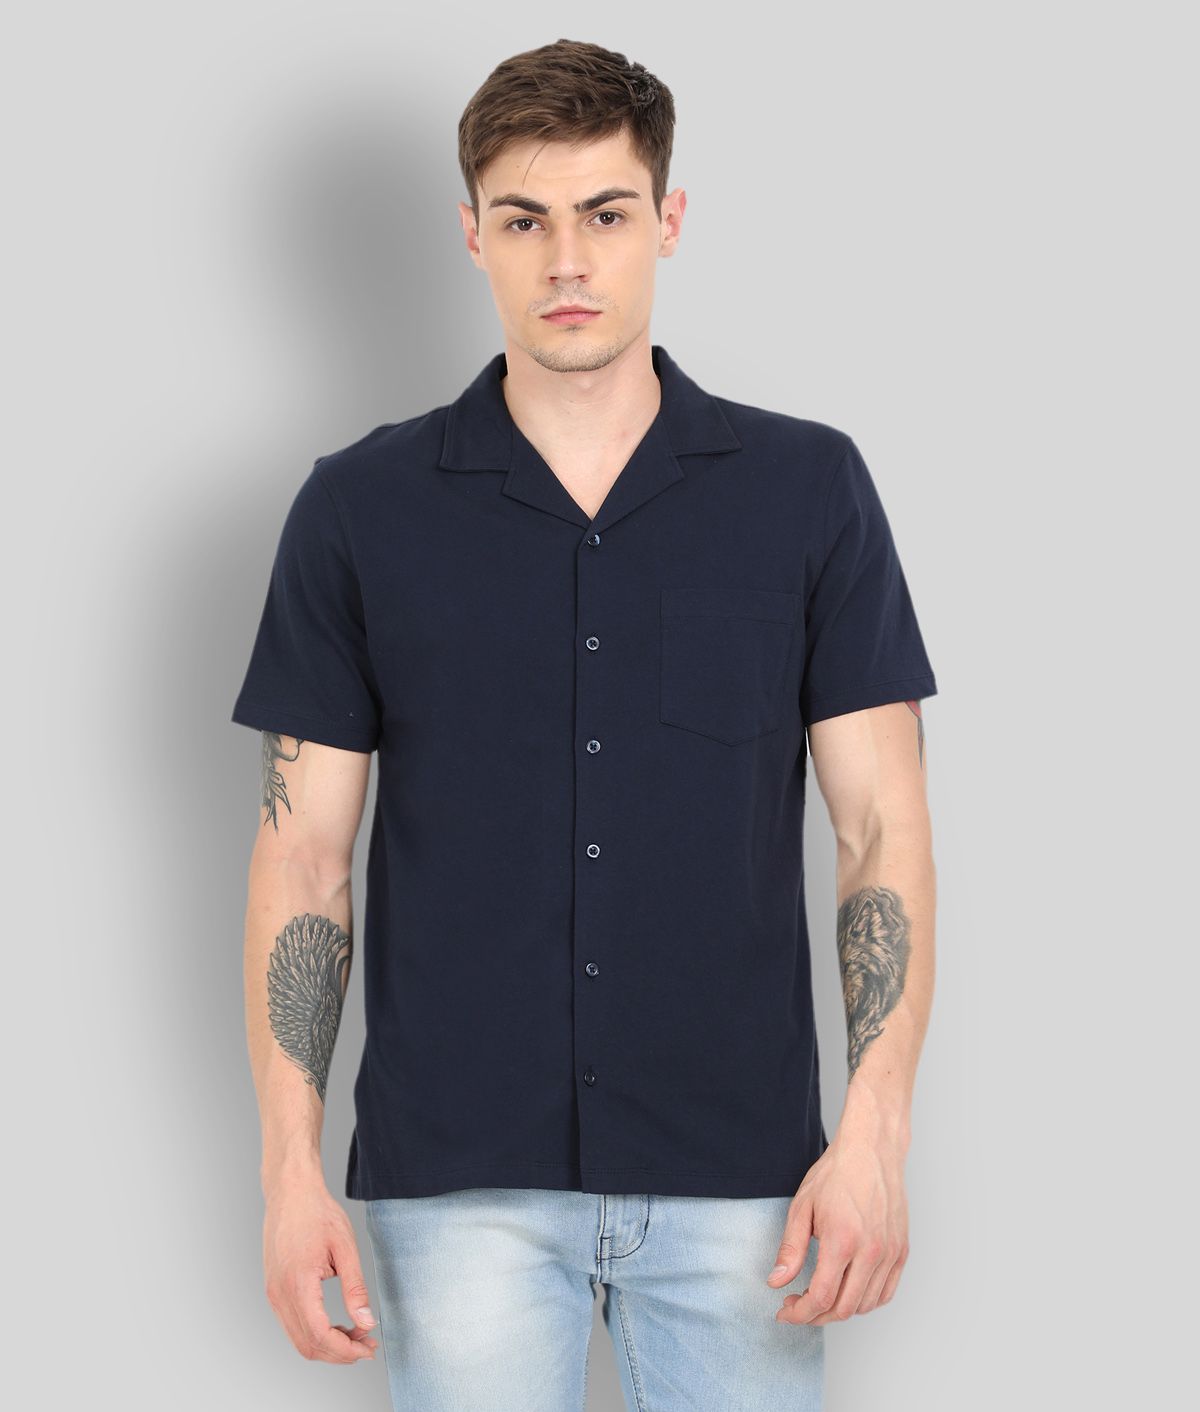 PIPER - Navy Cotton Regular Fit Men's Casual Shirt ( Pack of 1 )